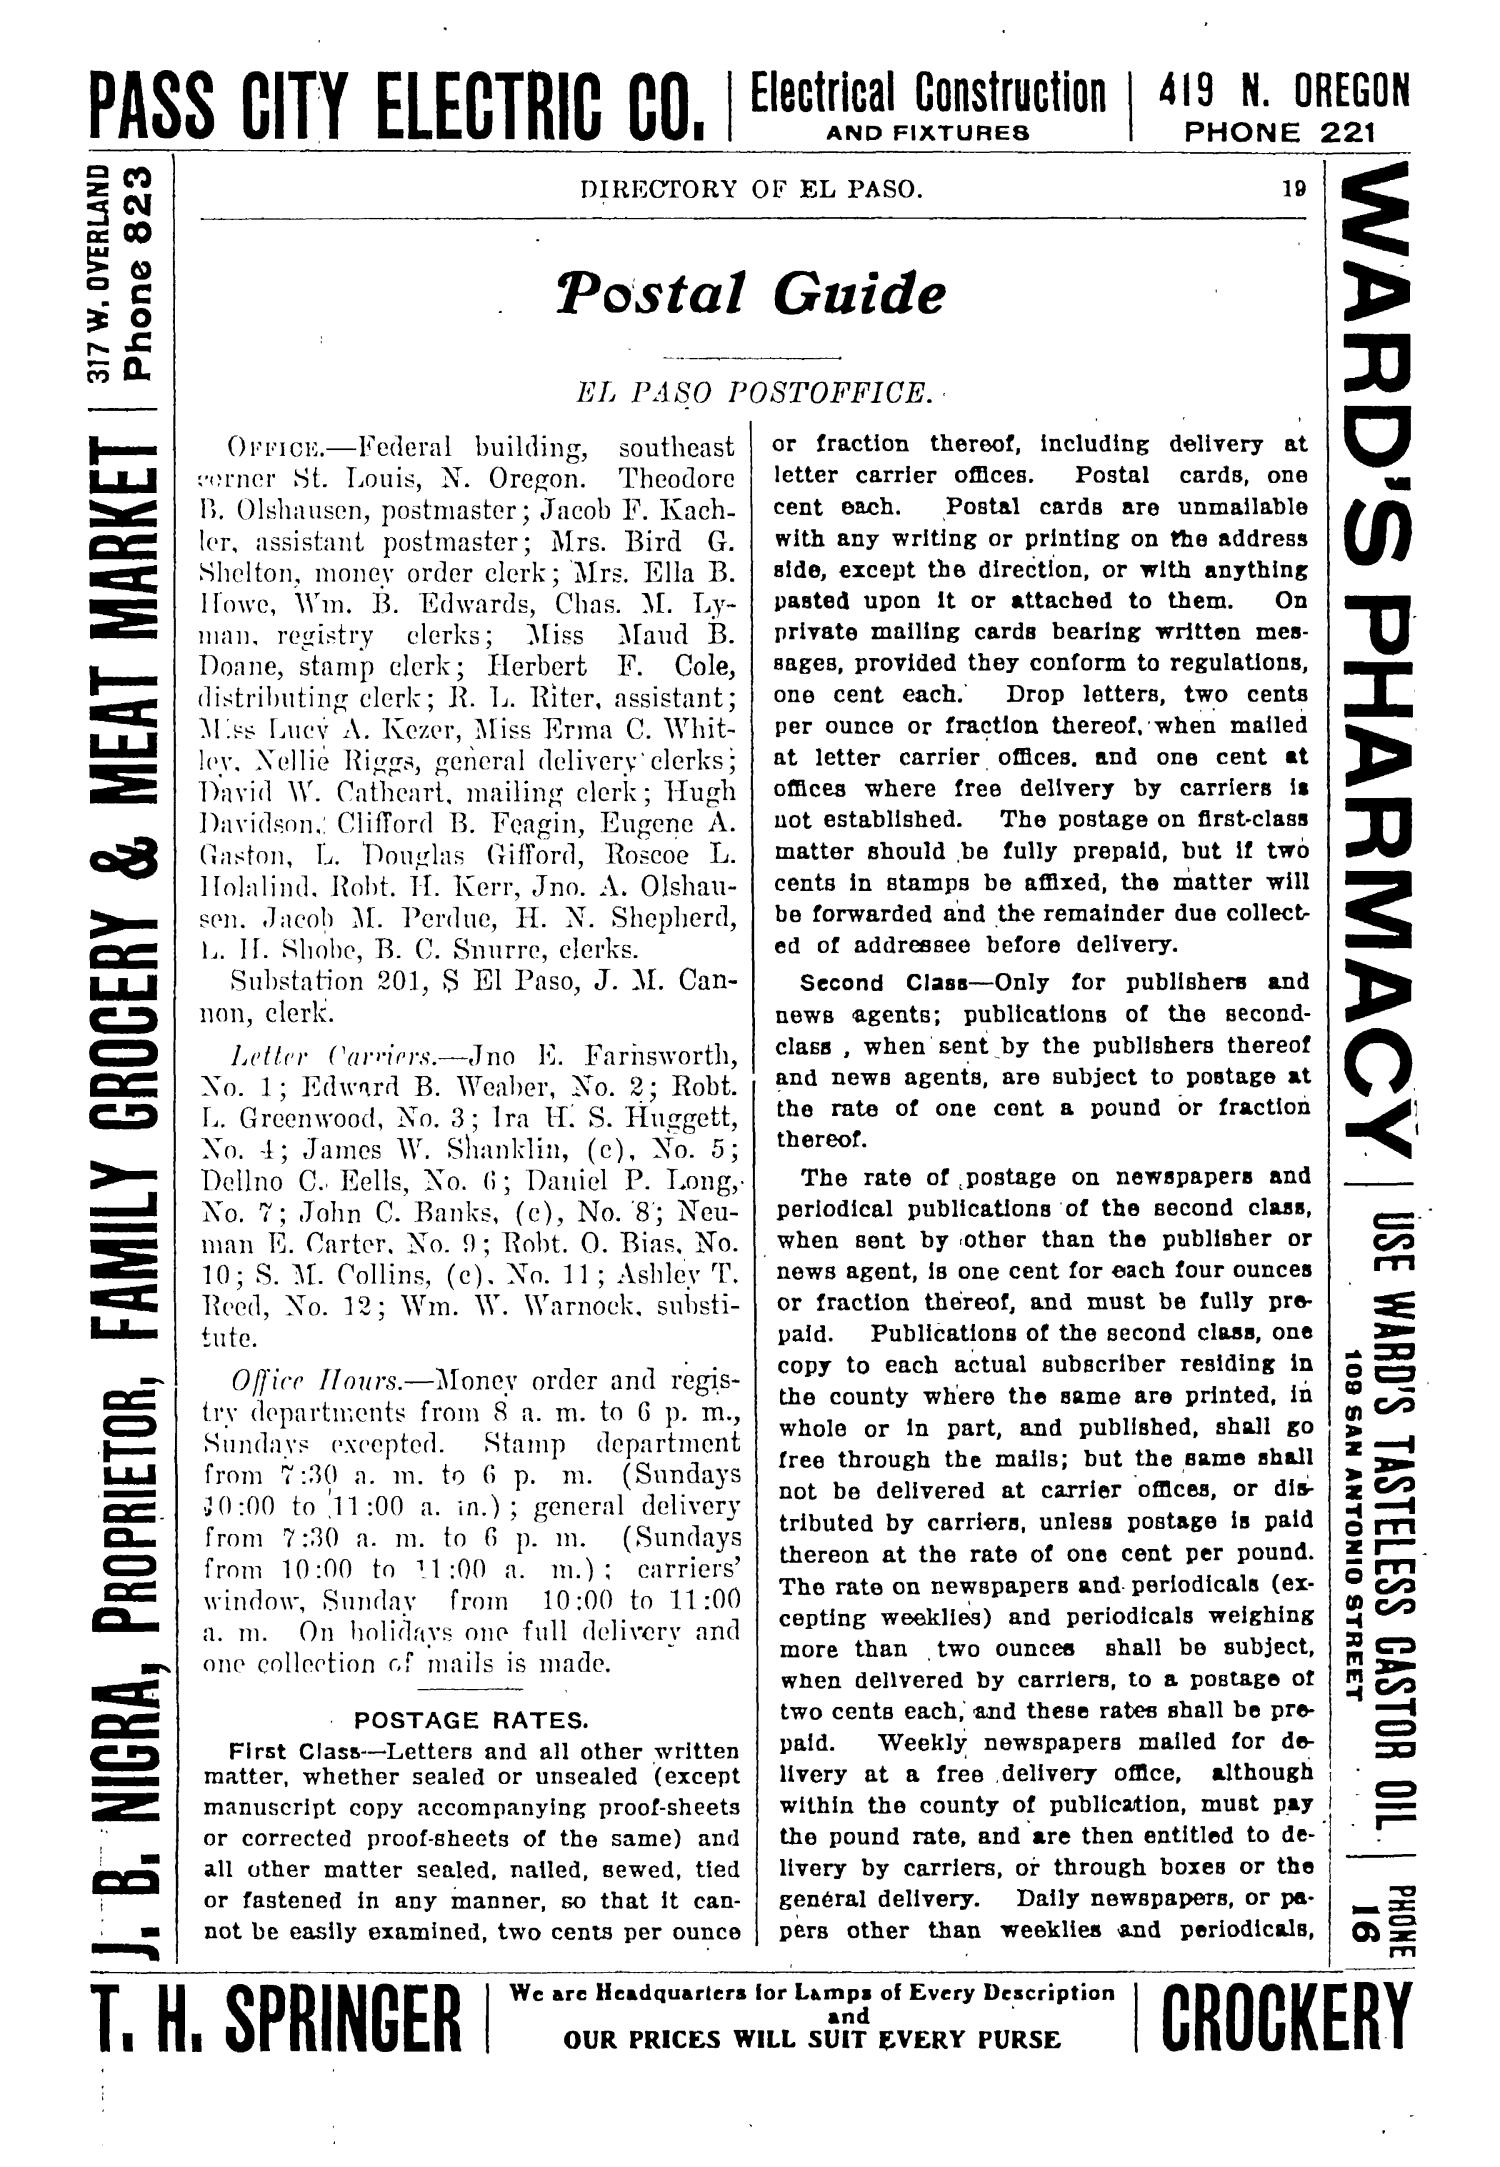 John F. Worley & Co.'s El Paso Directory for 1906
                                                
                                                    19
                                                